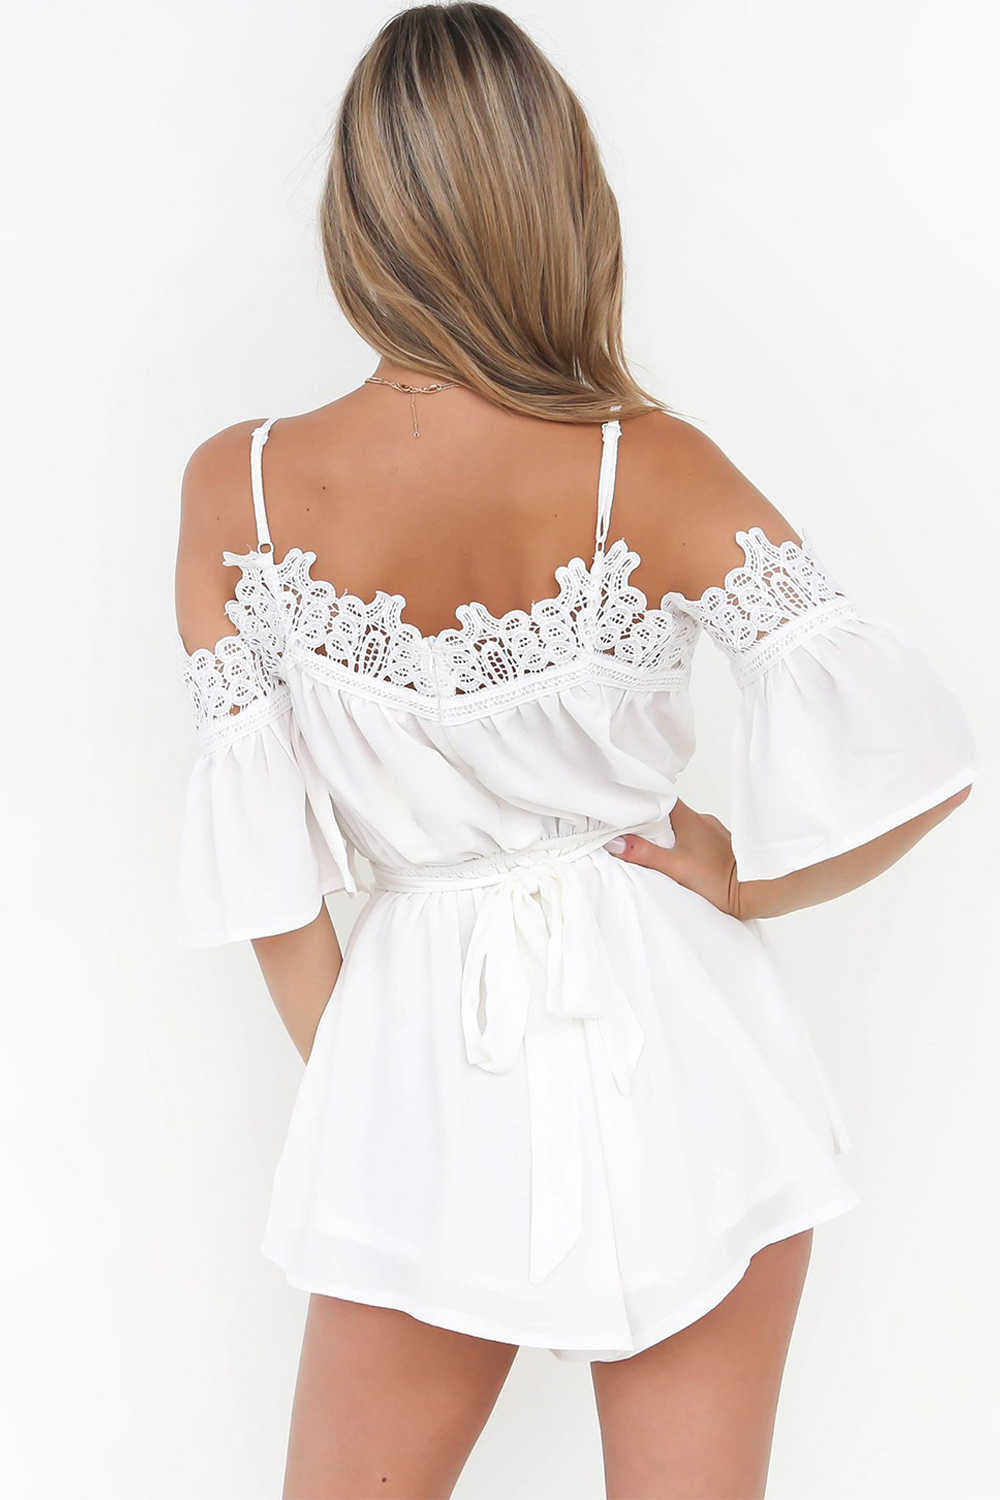 Iyasson Sexy Cold Shoulder Lace Trim Romper